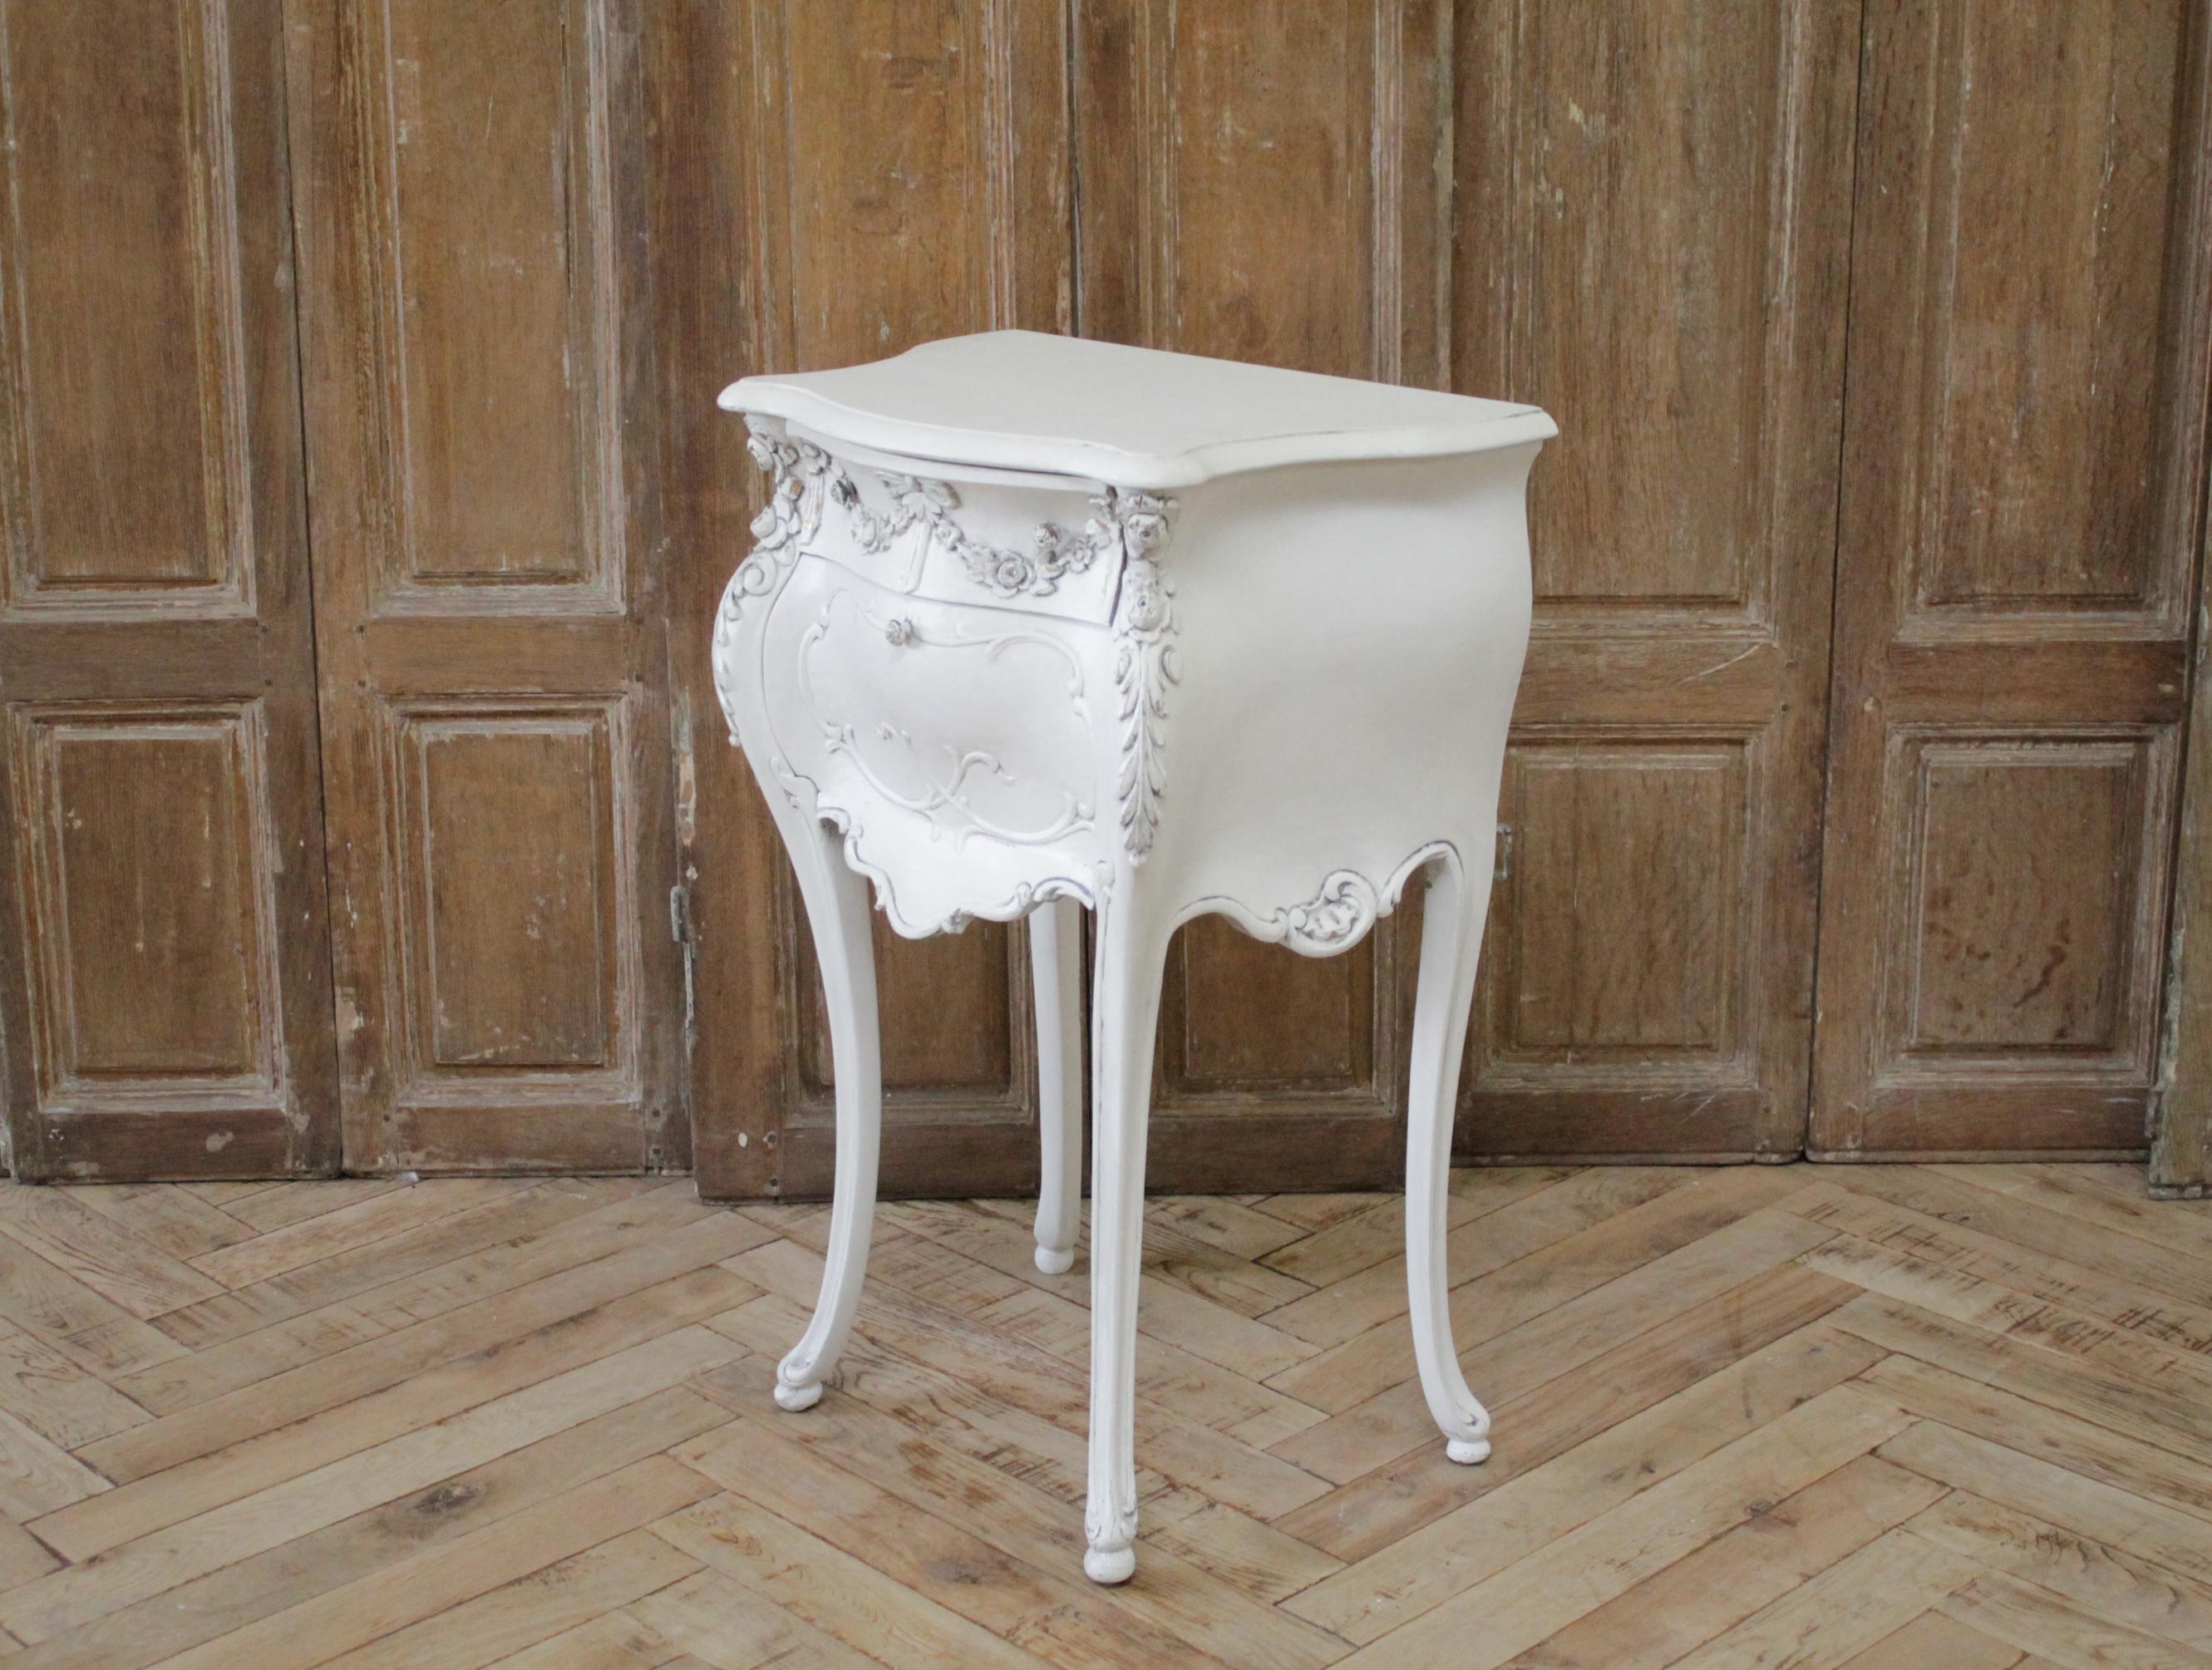 Antique carved and painted nightstand by Louis Bulloni
Painted in a antique white, with subtle distressed edges, and antique patina. This side table has a single drawer and drop down door for storage. 
A beautiful delicate ribbon and rose swag